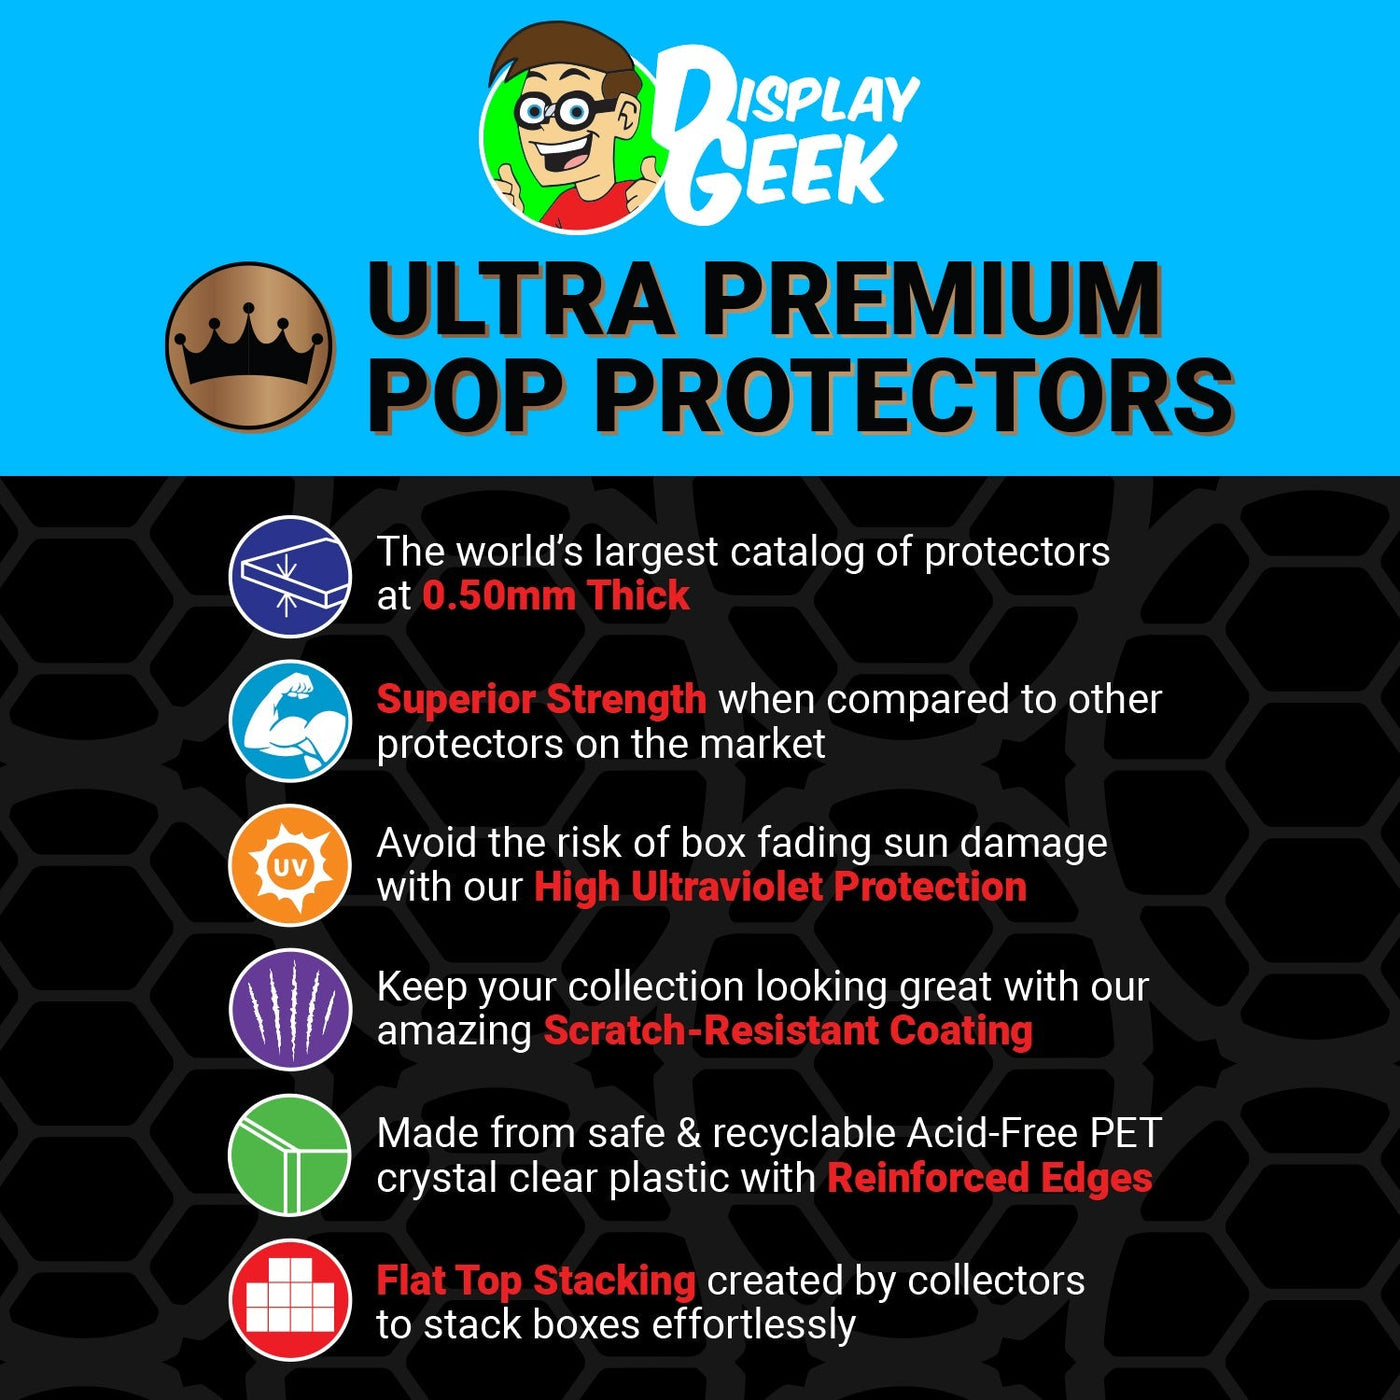 Pop Protector for Pain vs Naruto #1433 Funko Pop Moment on The Protector Guide App by Display Geek